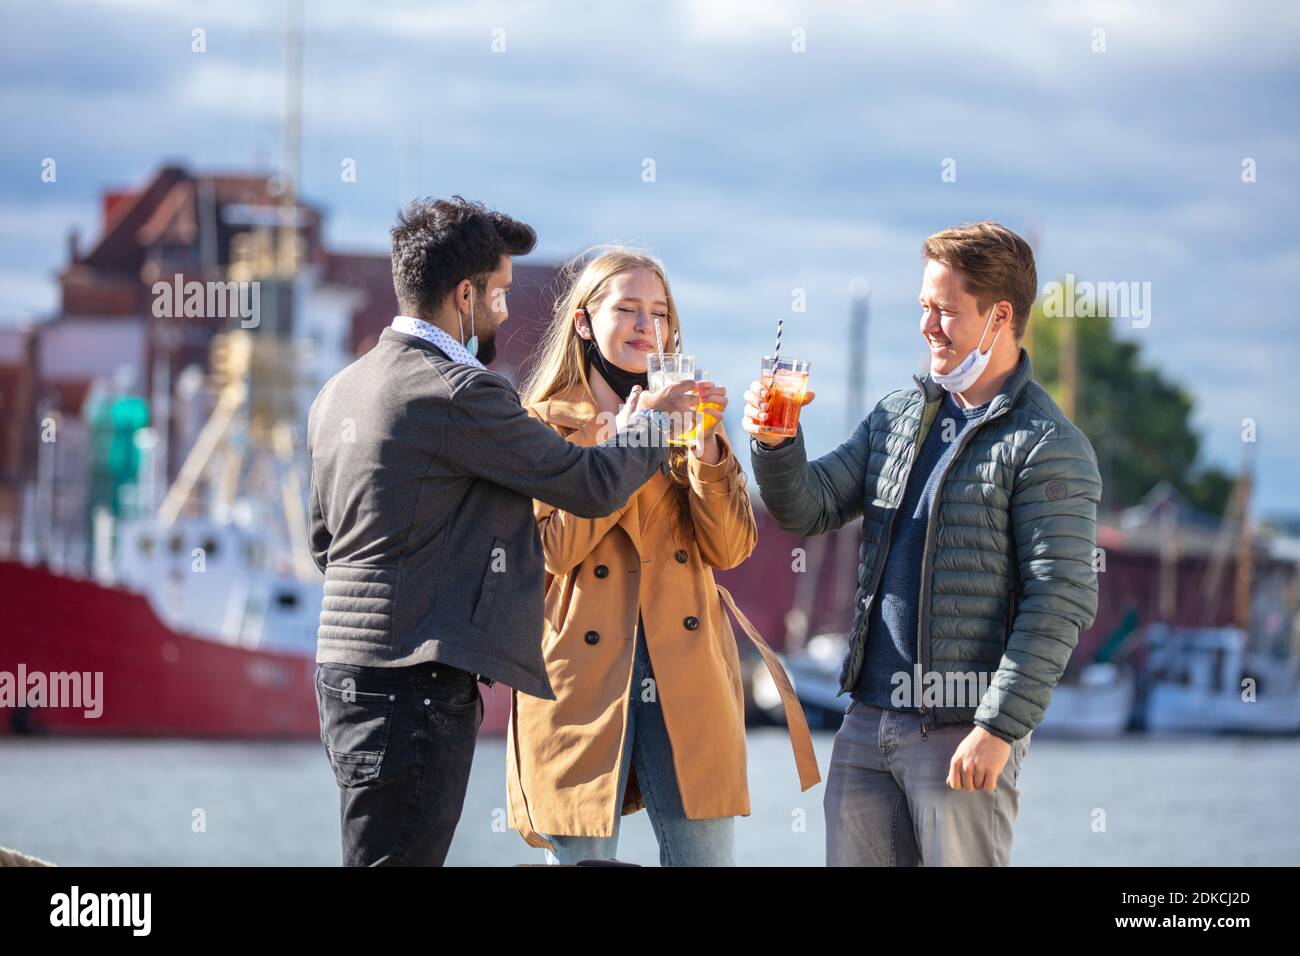 Two men and a woman with everyday masks in Corona time, out and about in the city in the cold season, drinks outdoors, small meeting among acquaintances, Stock Photo